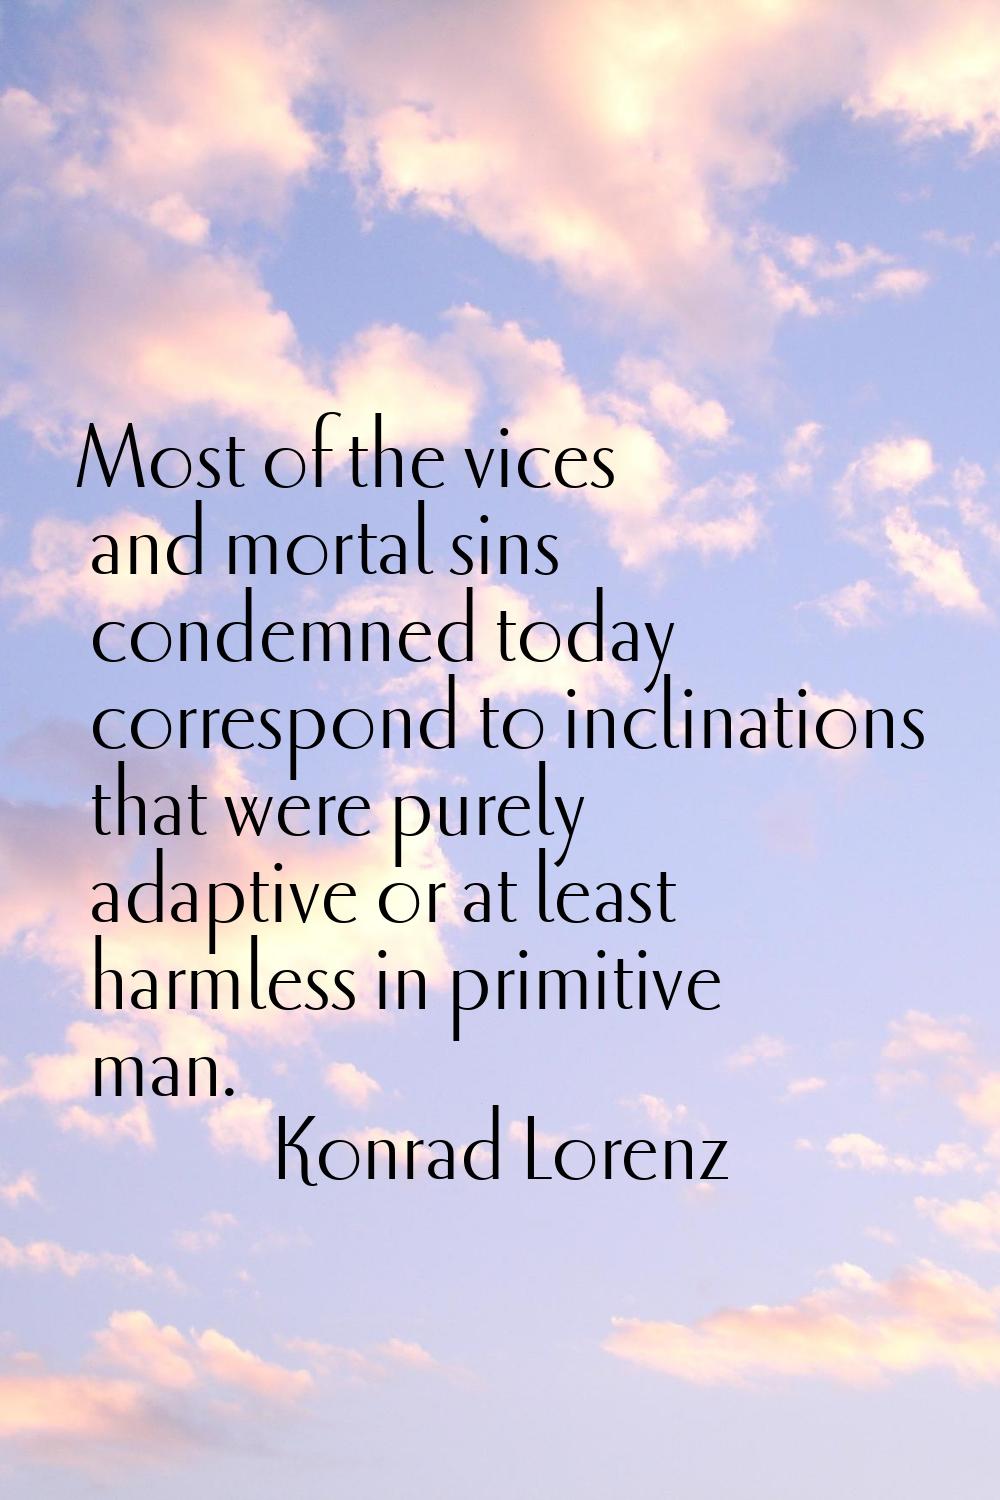 Most of the vices and mortal sins condemned today correspond to inclinations that were purely adapt